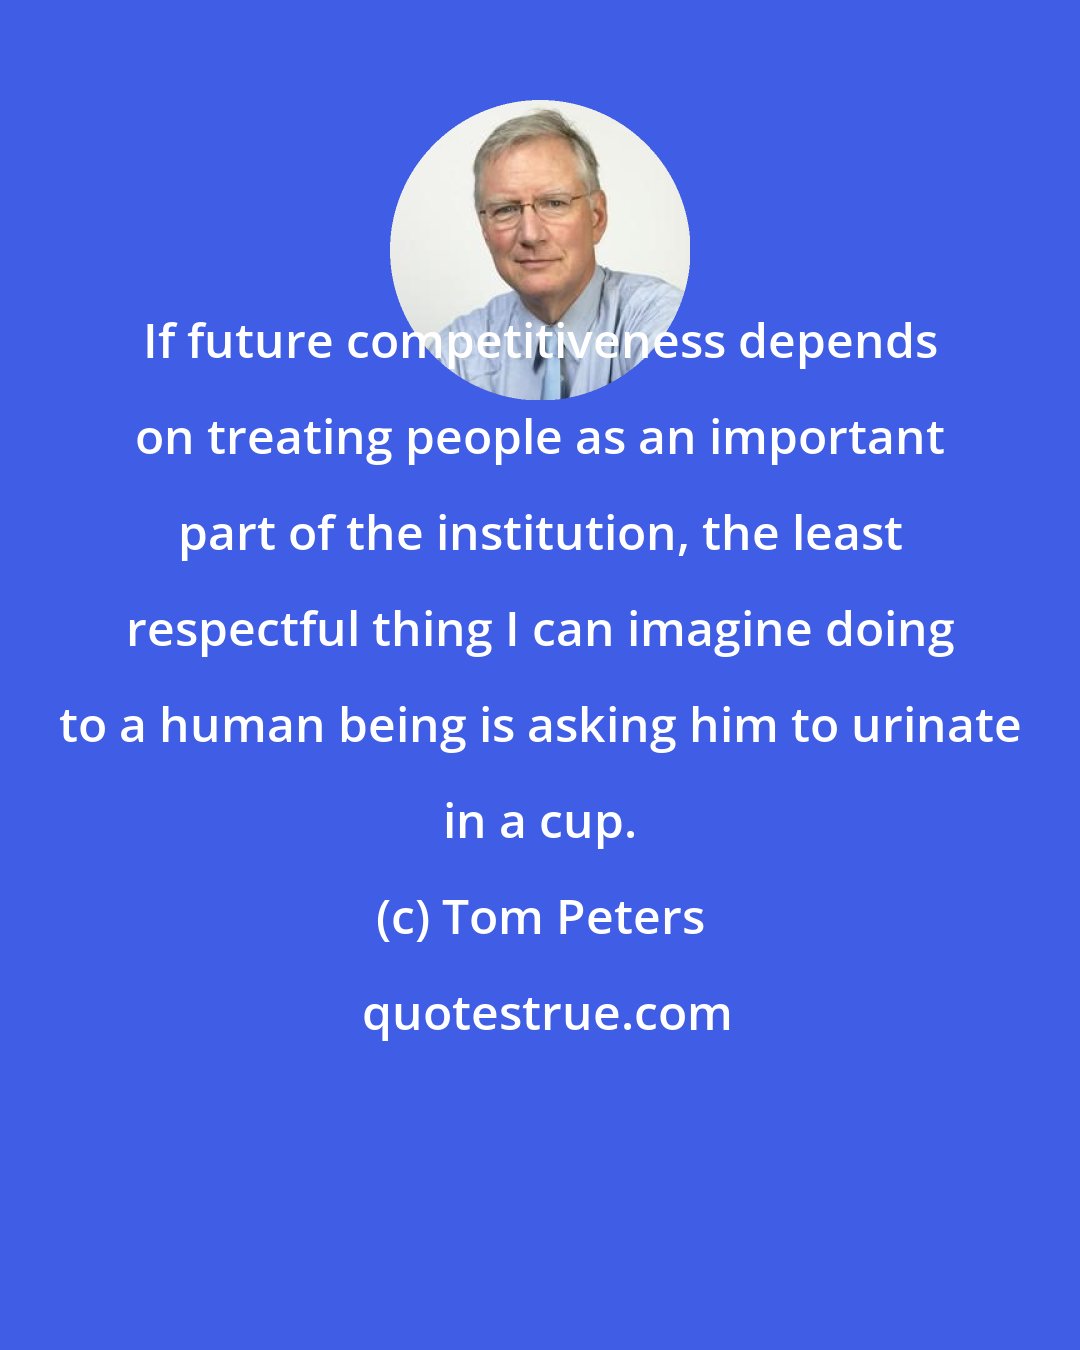 Tom Peters: If future competitiveness depends on treating people as an important part of the institution, the least respectful thing I can imagine doing to a human being is asking him to urinate in a cup.